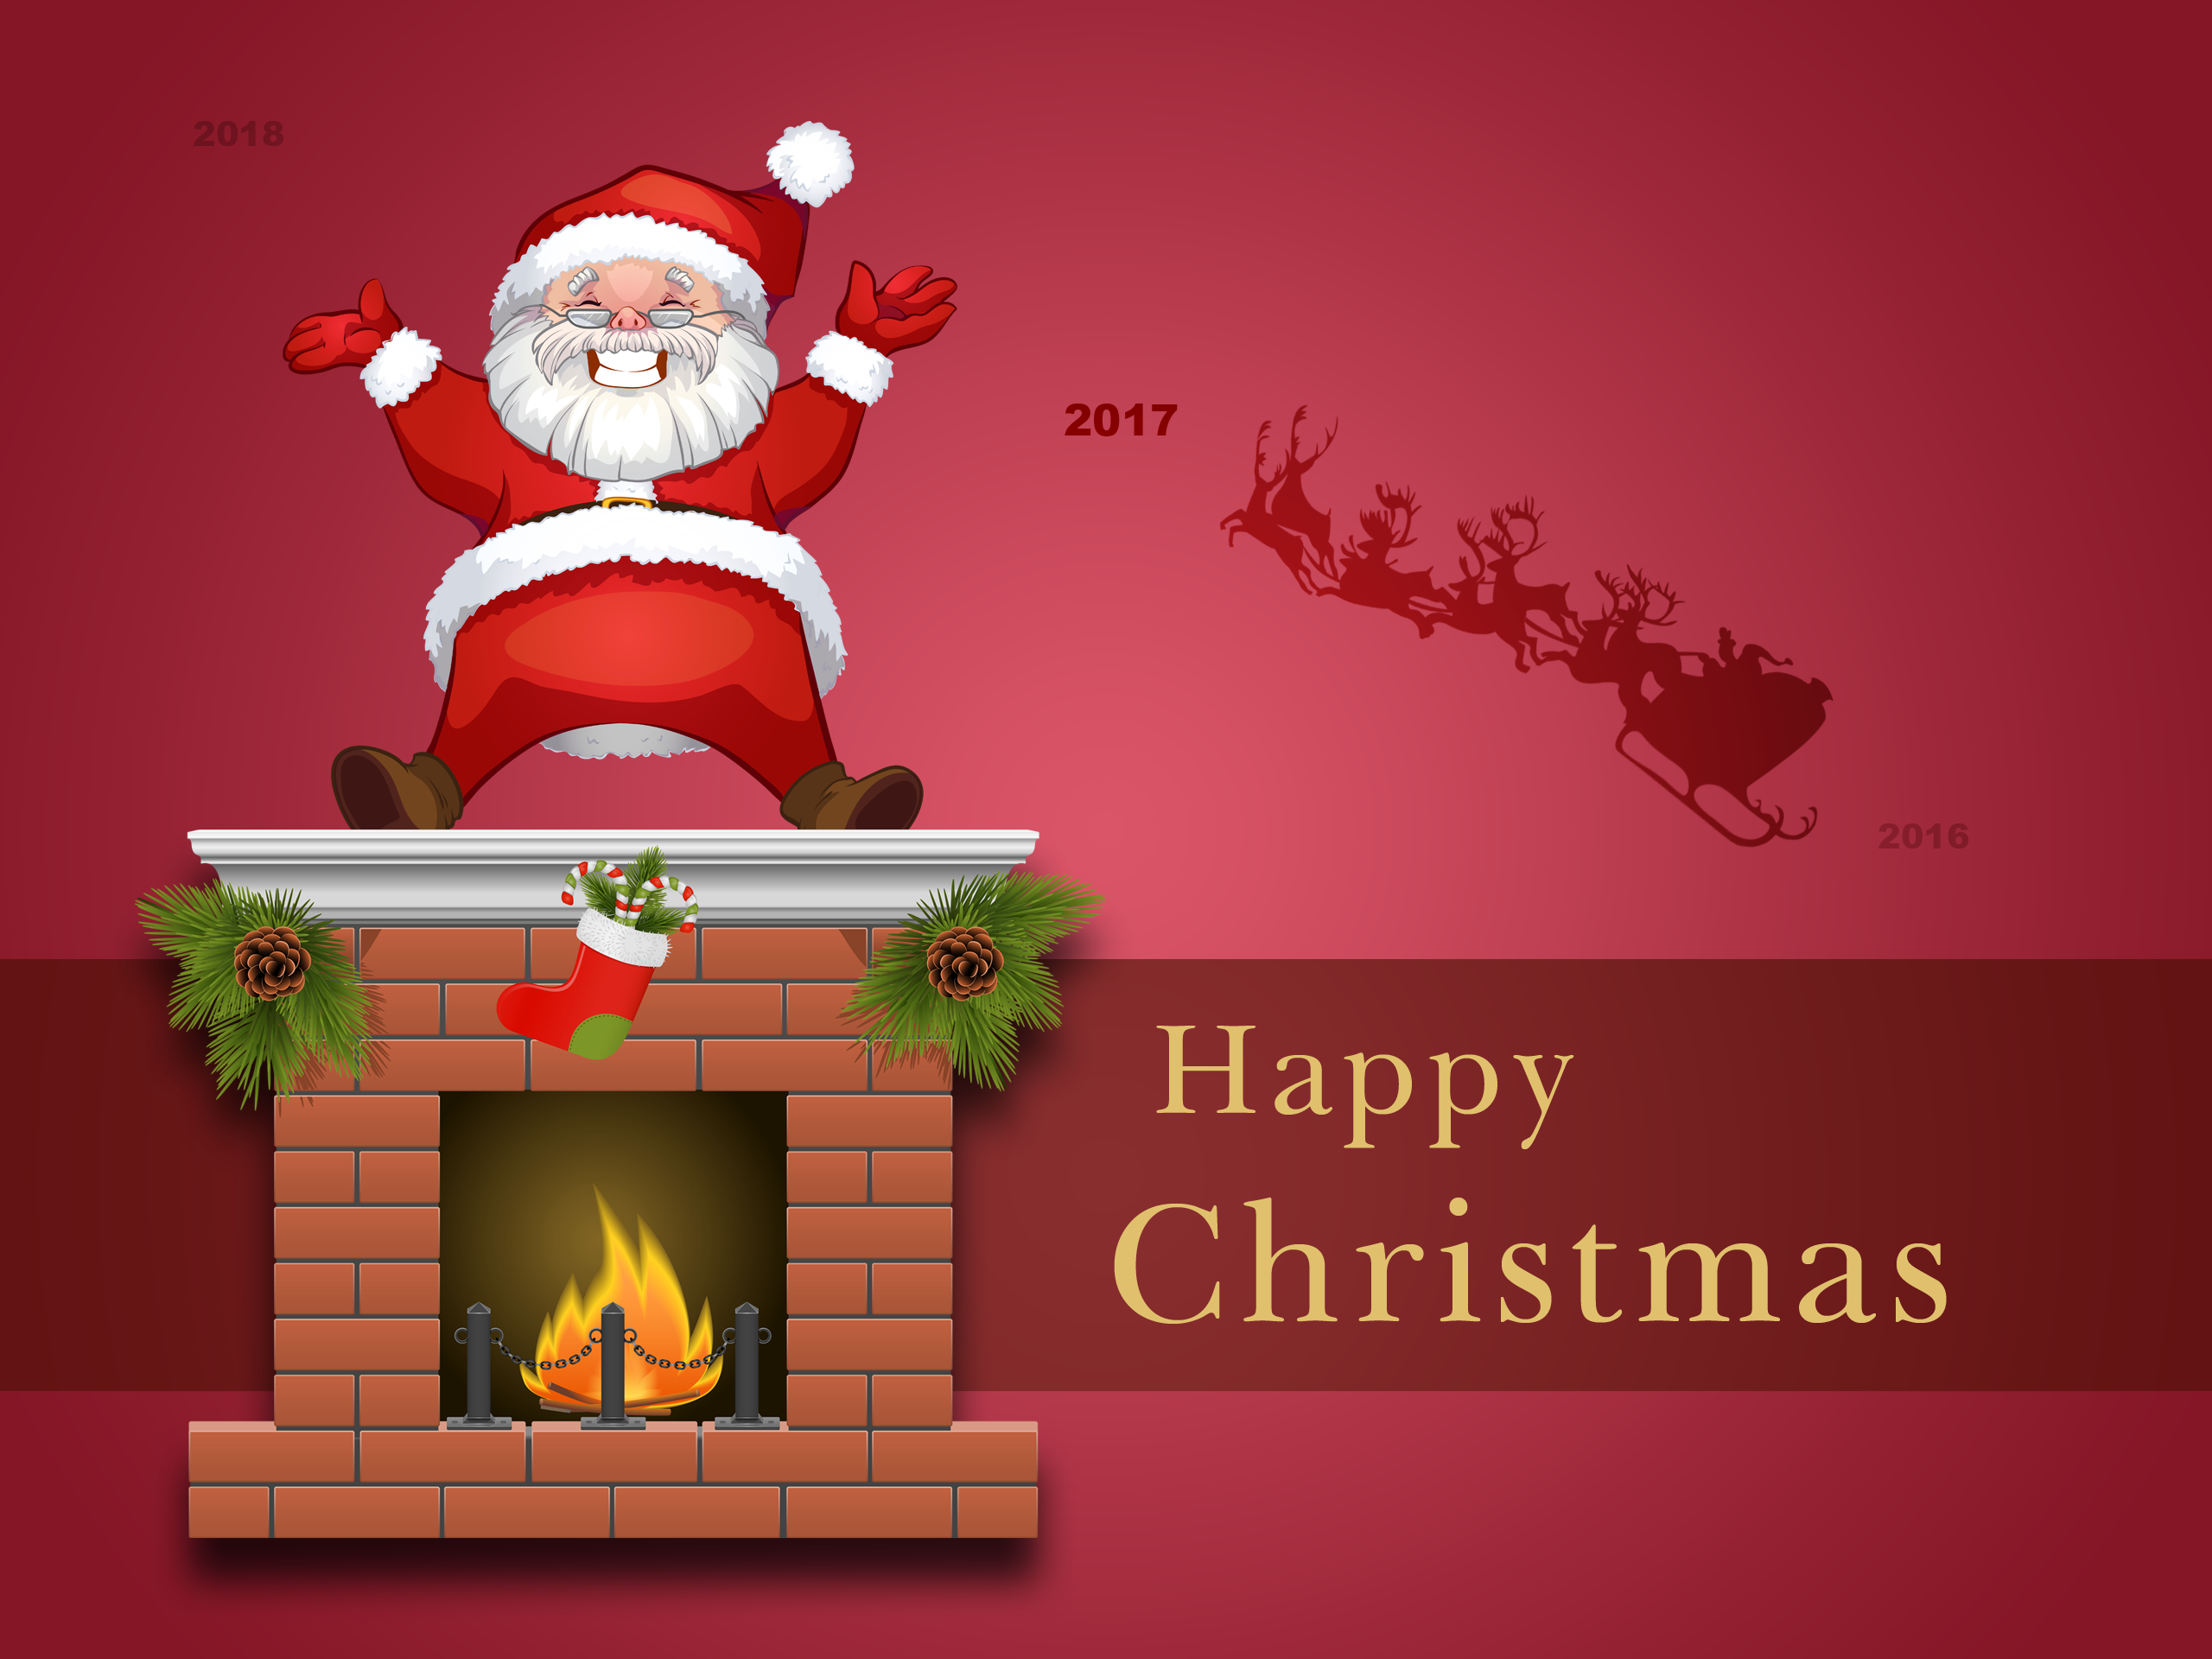 Happy Christmas 2017 Wallpaper, HD Holidays 4K Wallpapers, Images